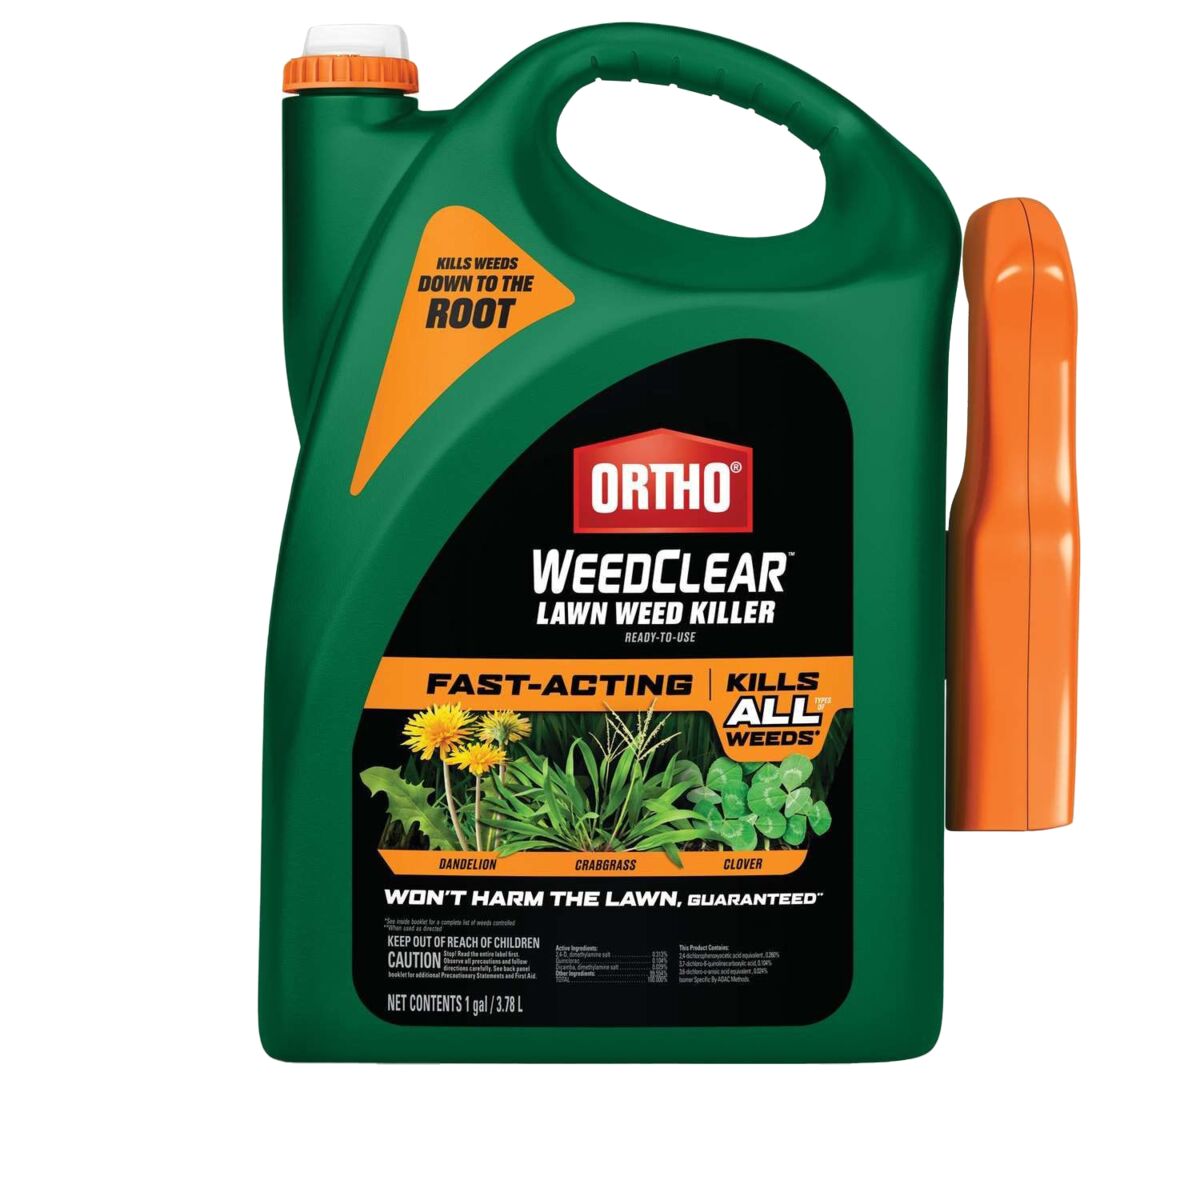 Weedclear Lawn Weed Killer Ready to Use - 1 Gallon